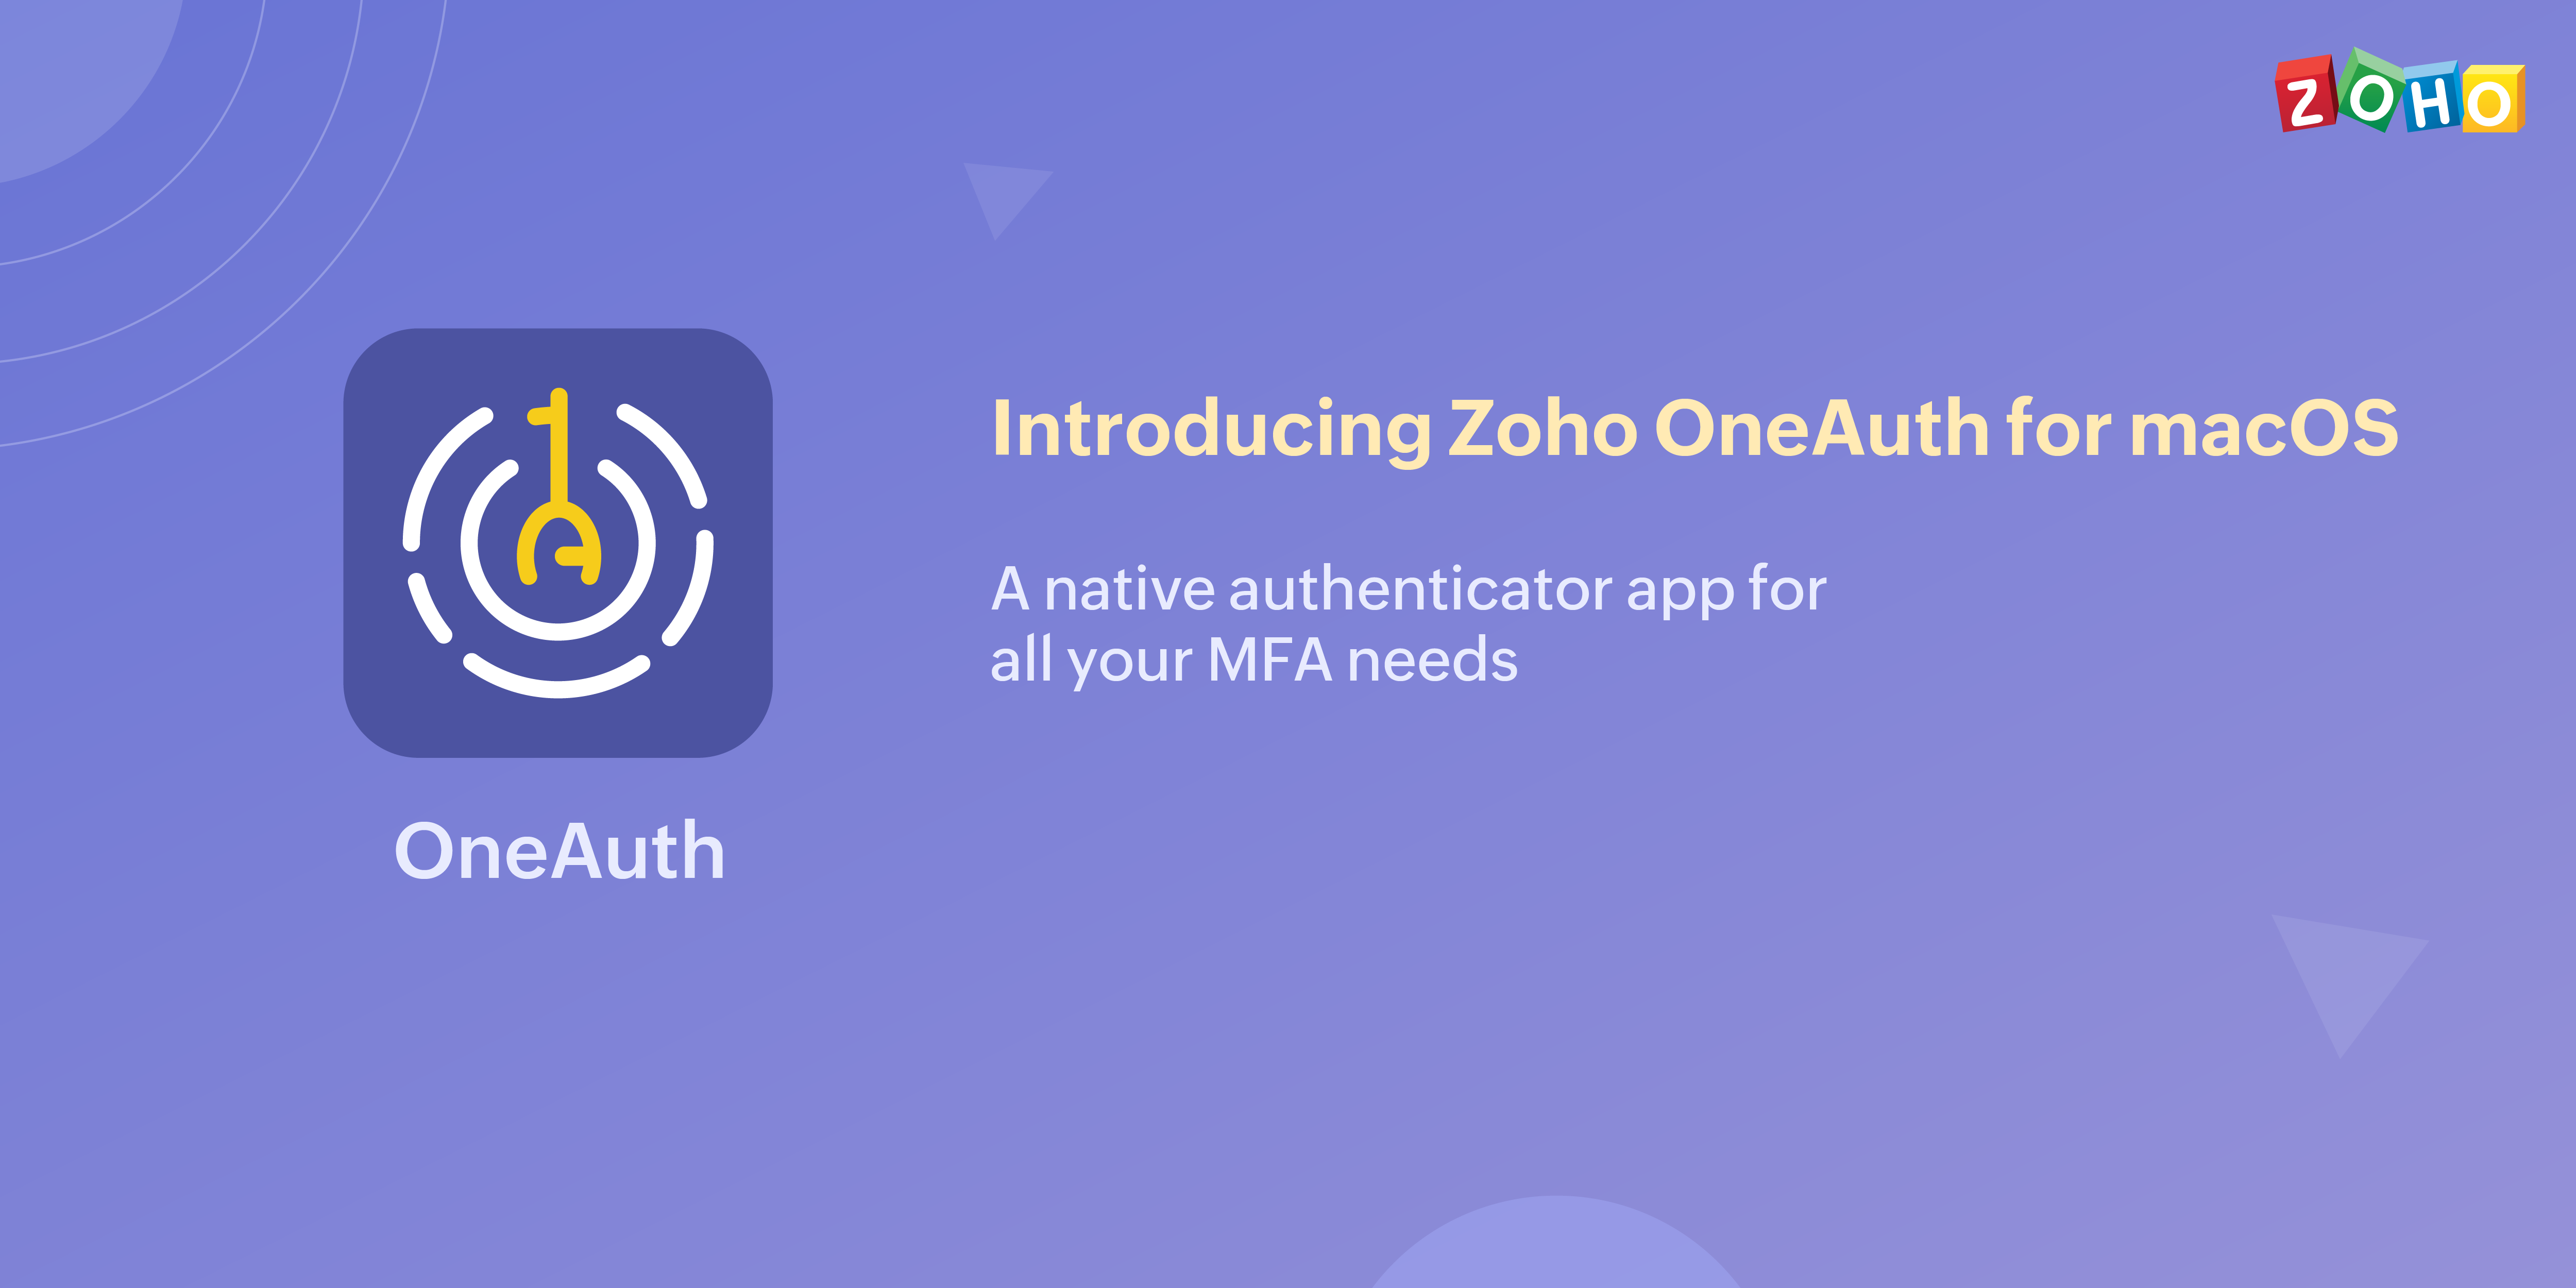 Introducing Zoho OneAuth - Authenticator for macOS